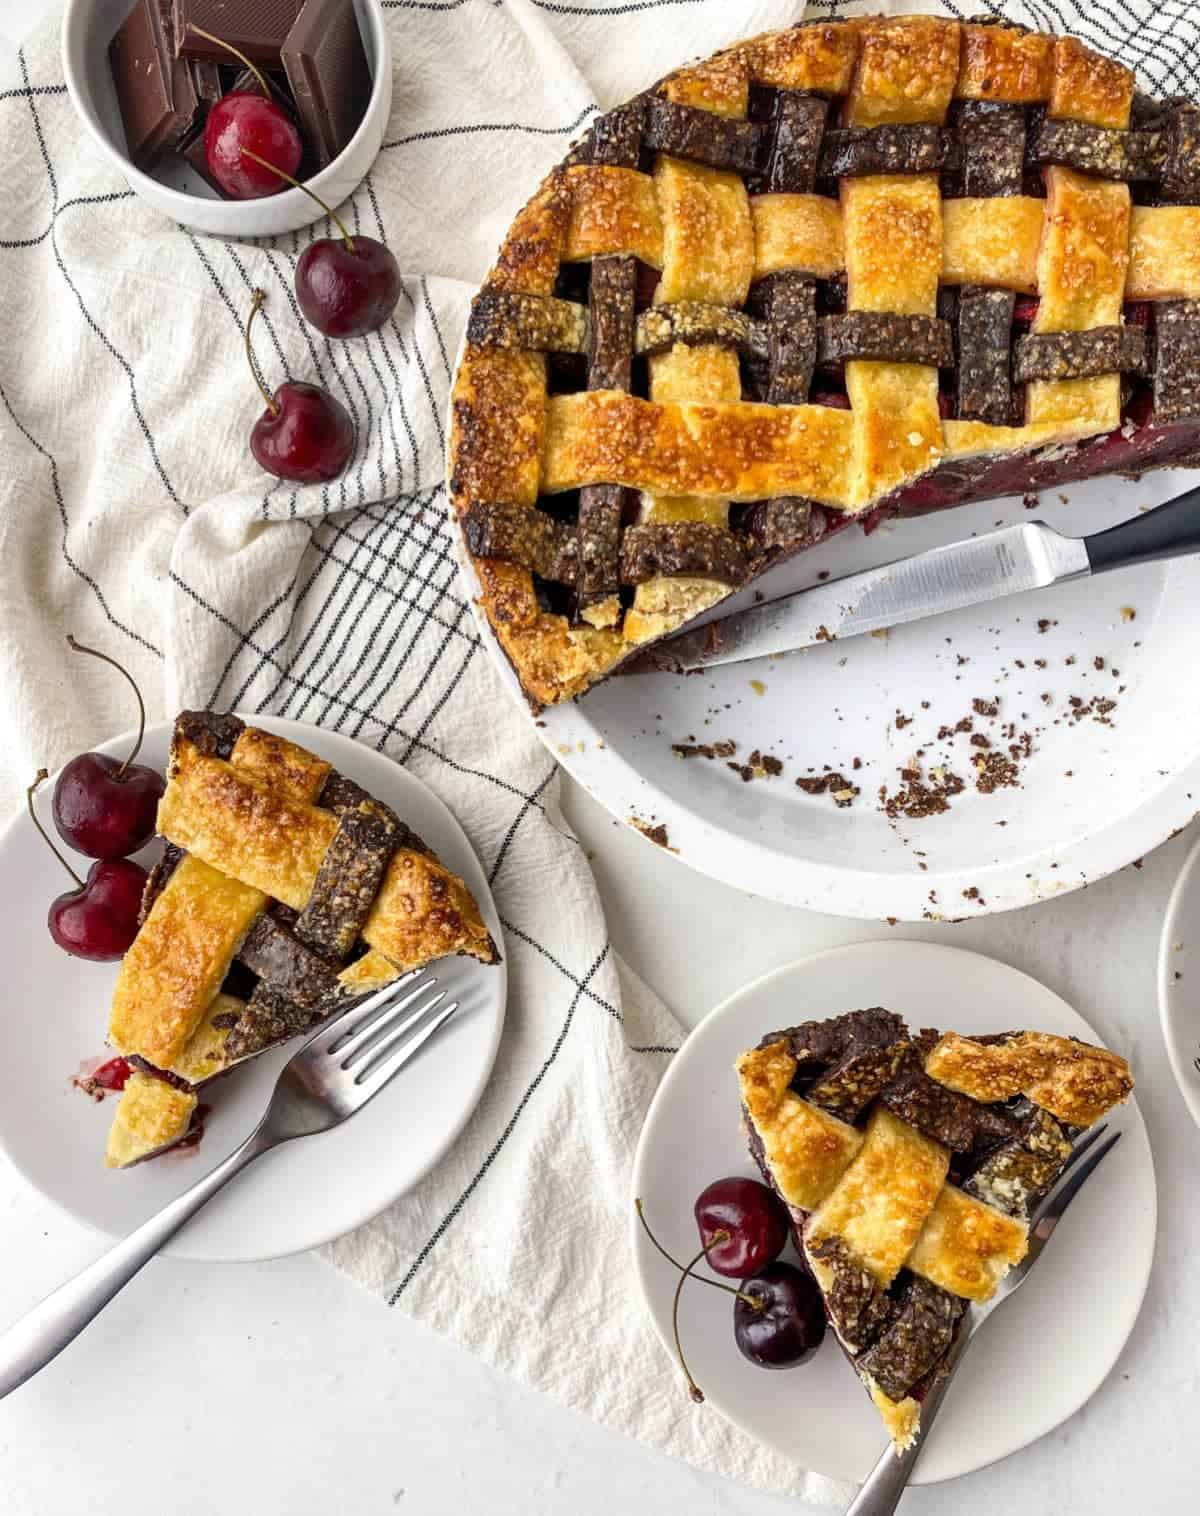 Top view of sliced Chocolate Cherry Pie with fresh cherries and chocolate in a bowl.